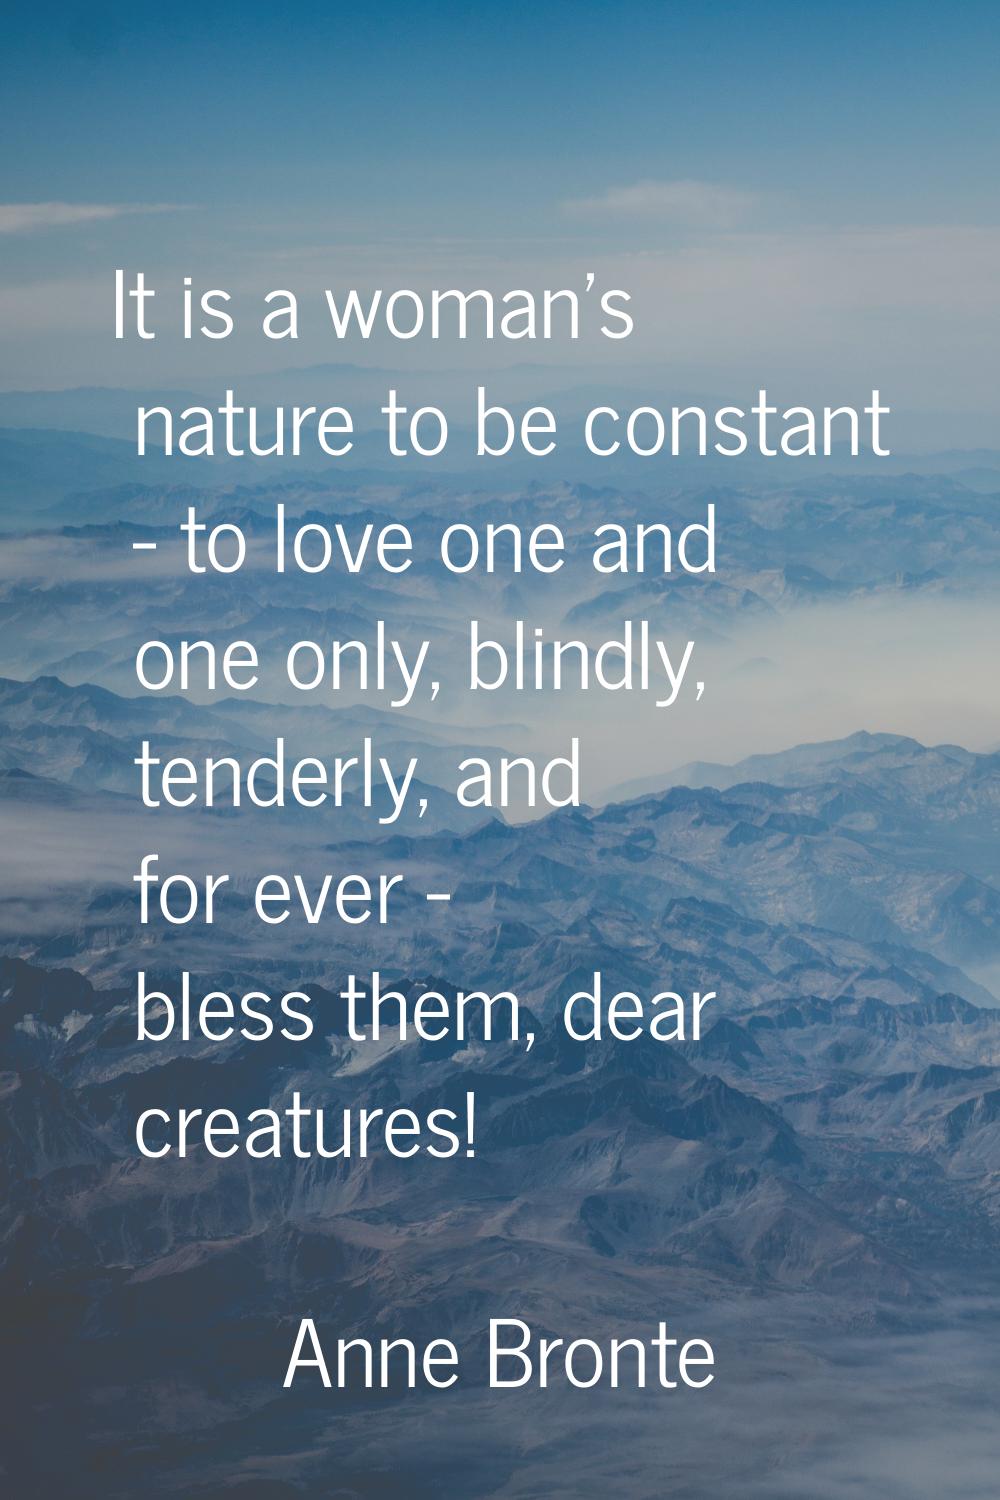 It is a woman's nature to be constant - to love one and one only, blindly, tenderly, and for ever -